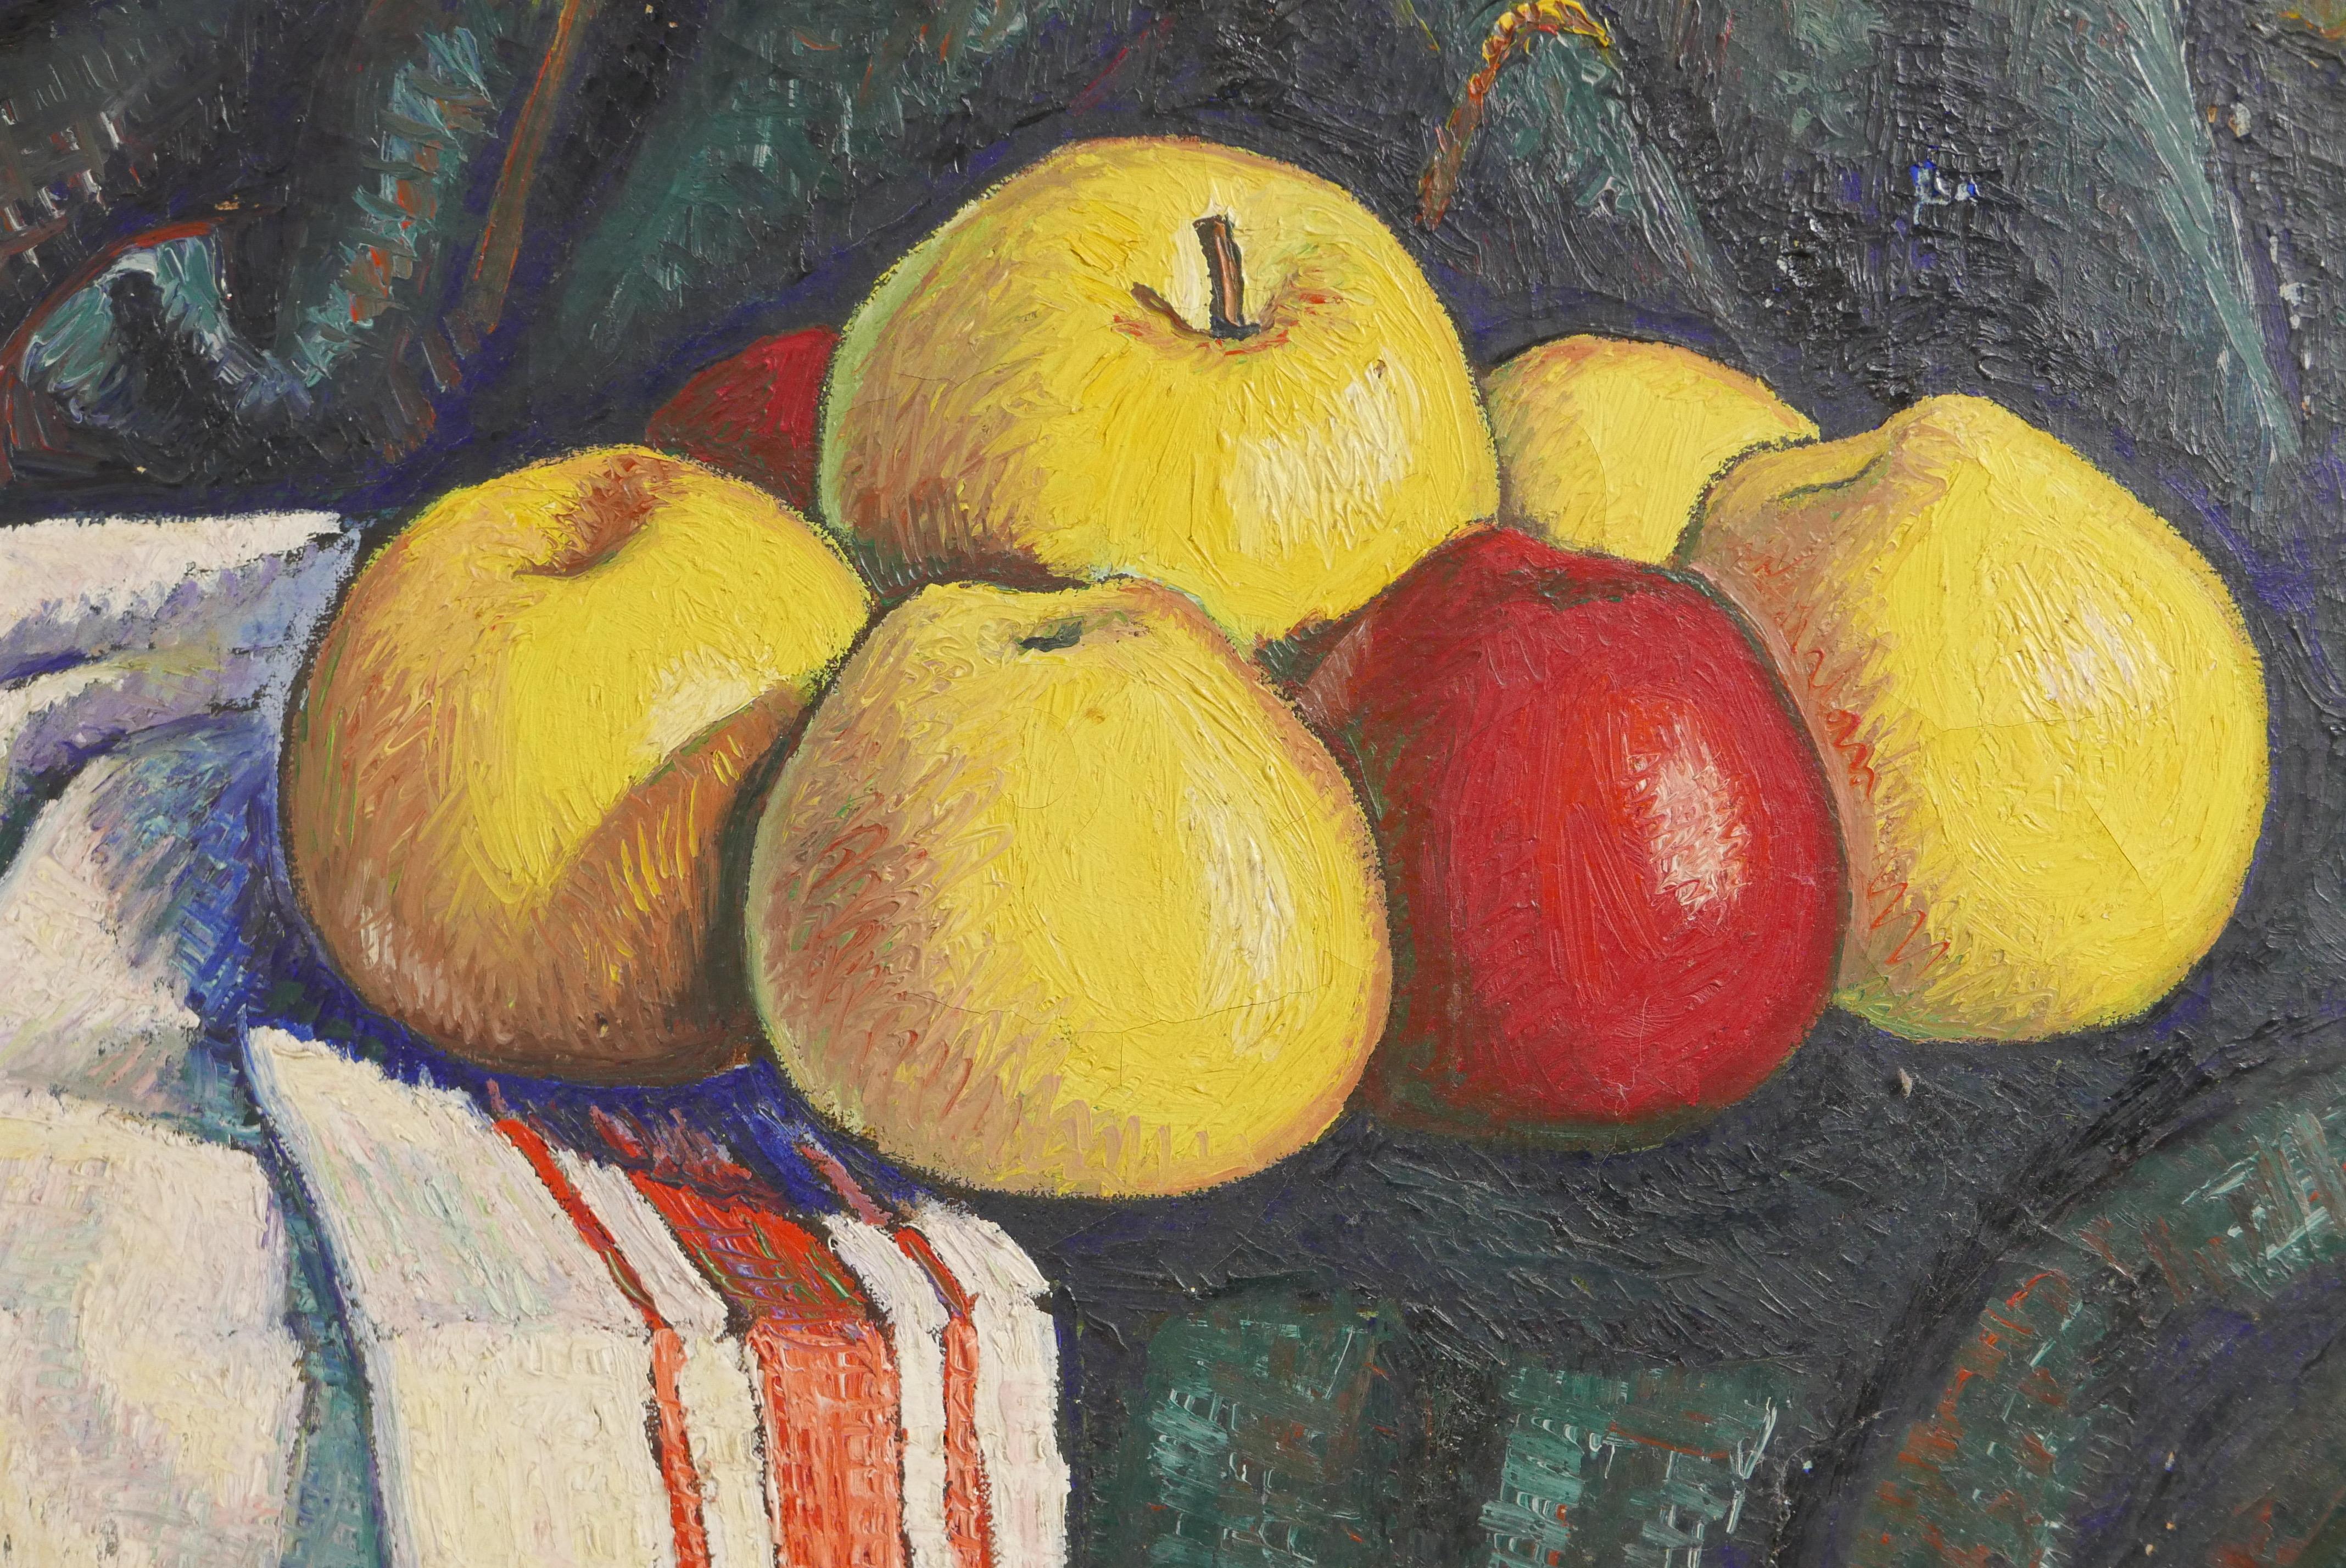 Pair of Mid-20th Century Still Life Paintings of Fruit Signed Bolomey, 1948 For Sale 2